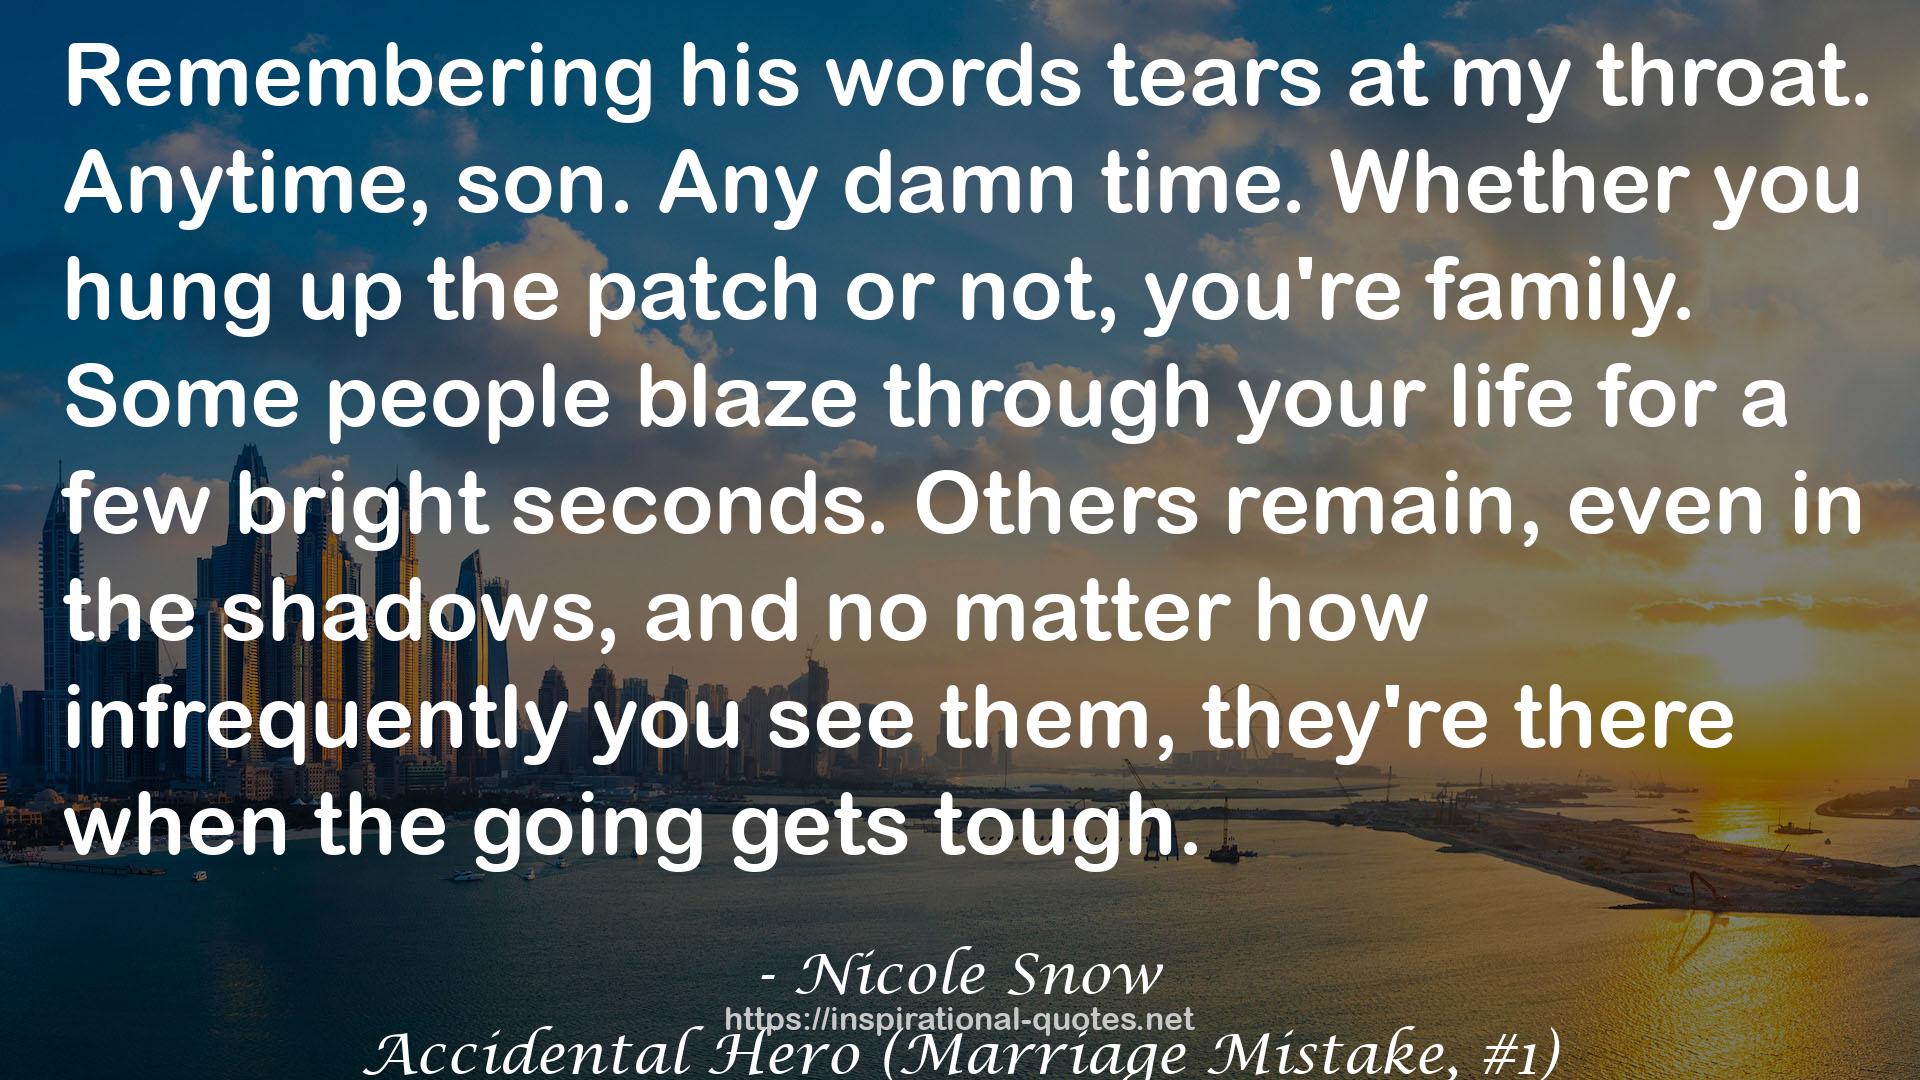 Accidental Hero (Marriage Mistake, #1) QUOTES